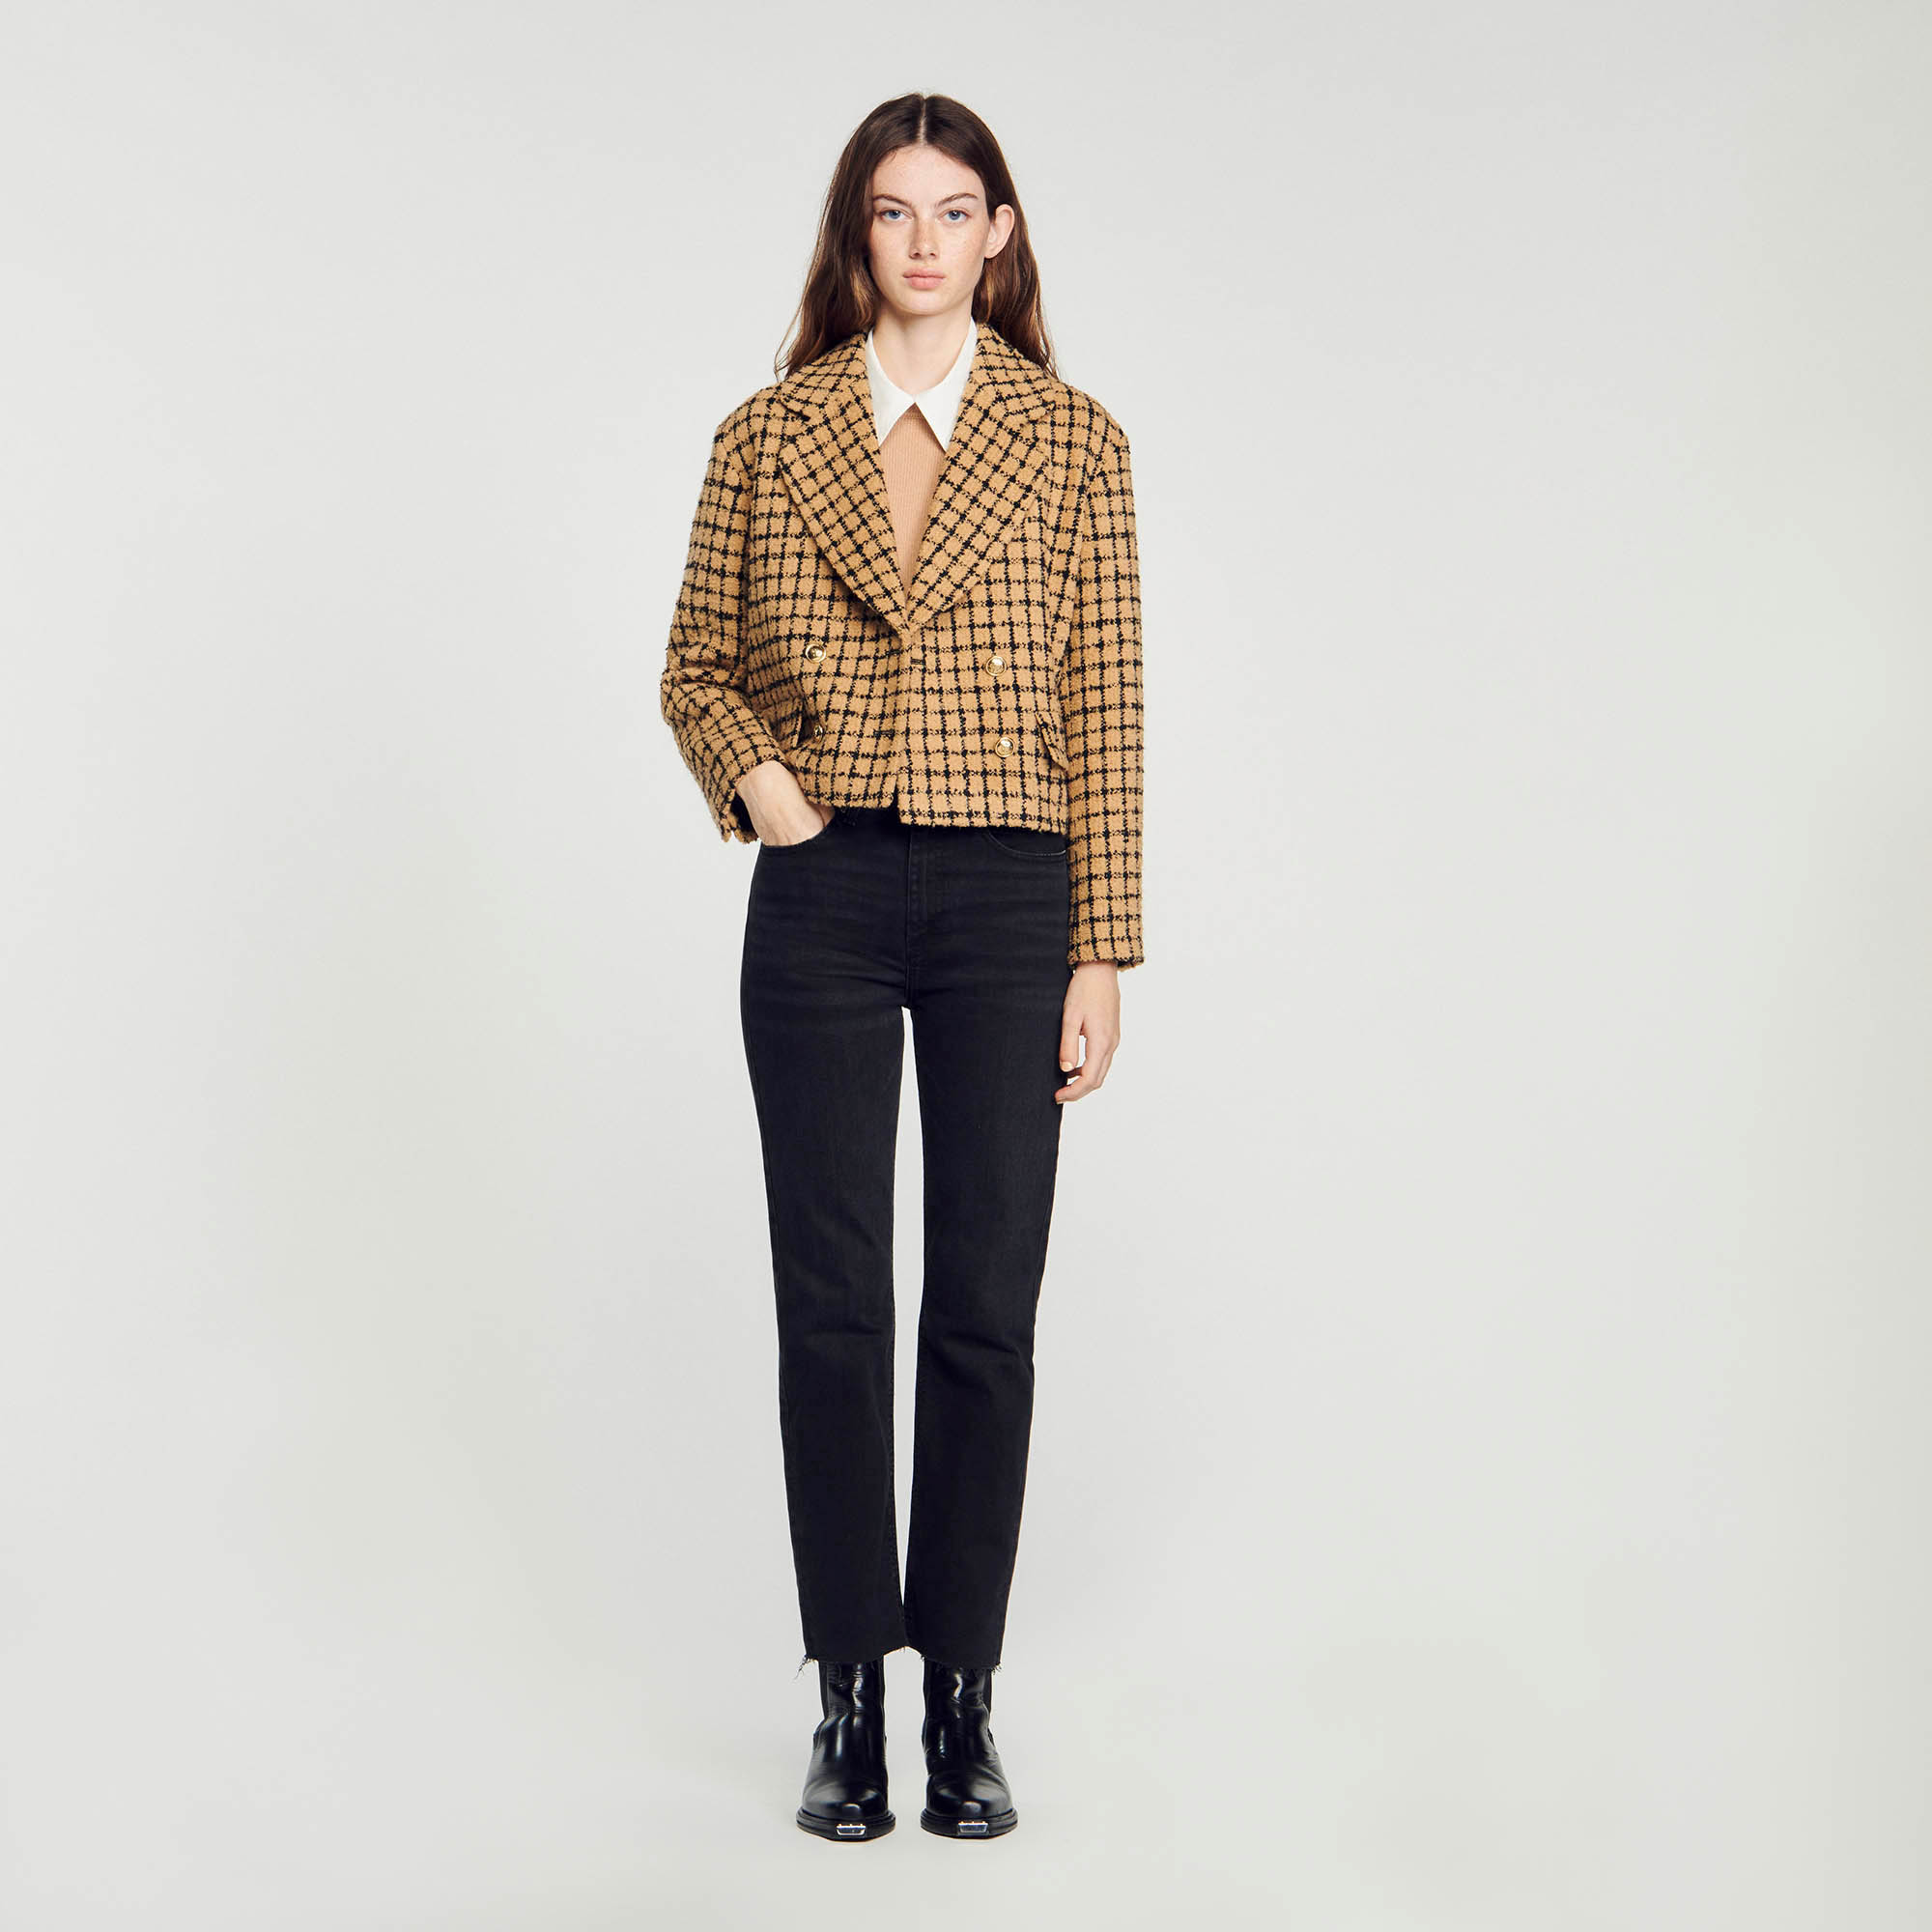 Sandro acrylic Short tweed check jacket featuring a large lapel collar, double-breasted buttons and flap pockets on the waist